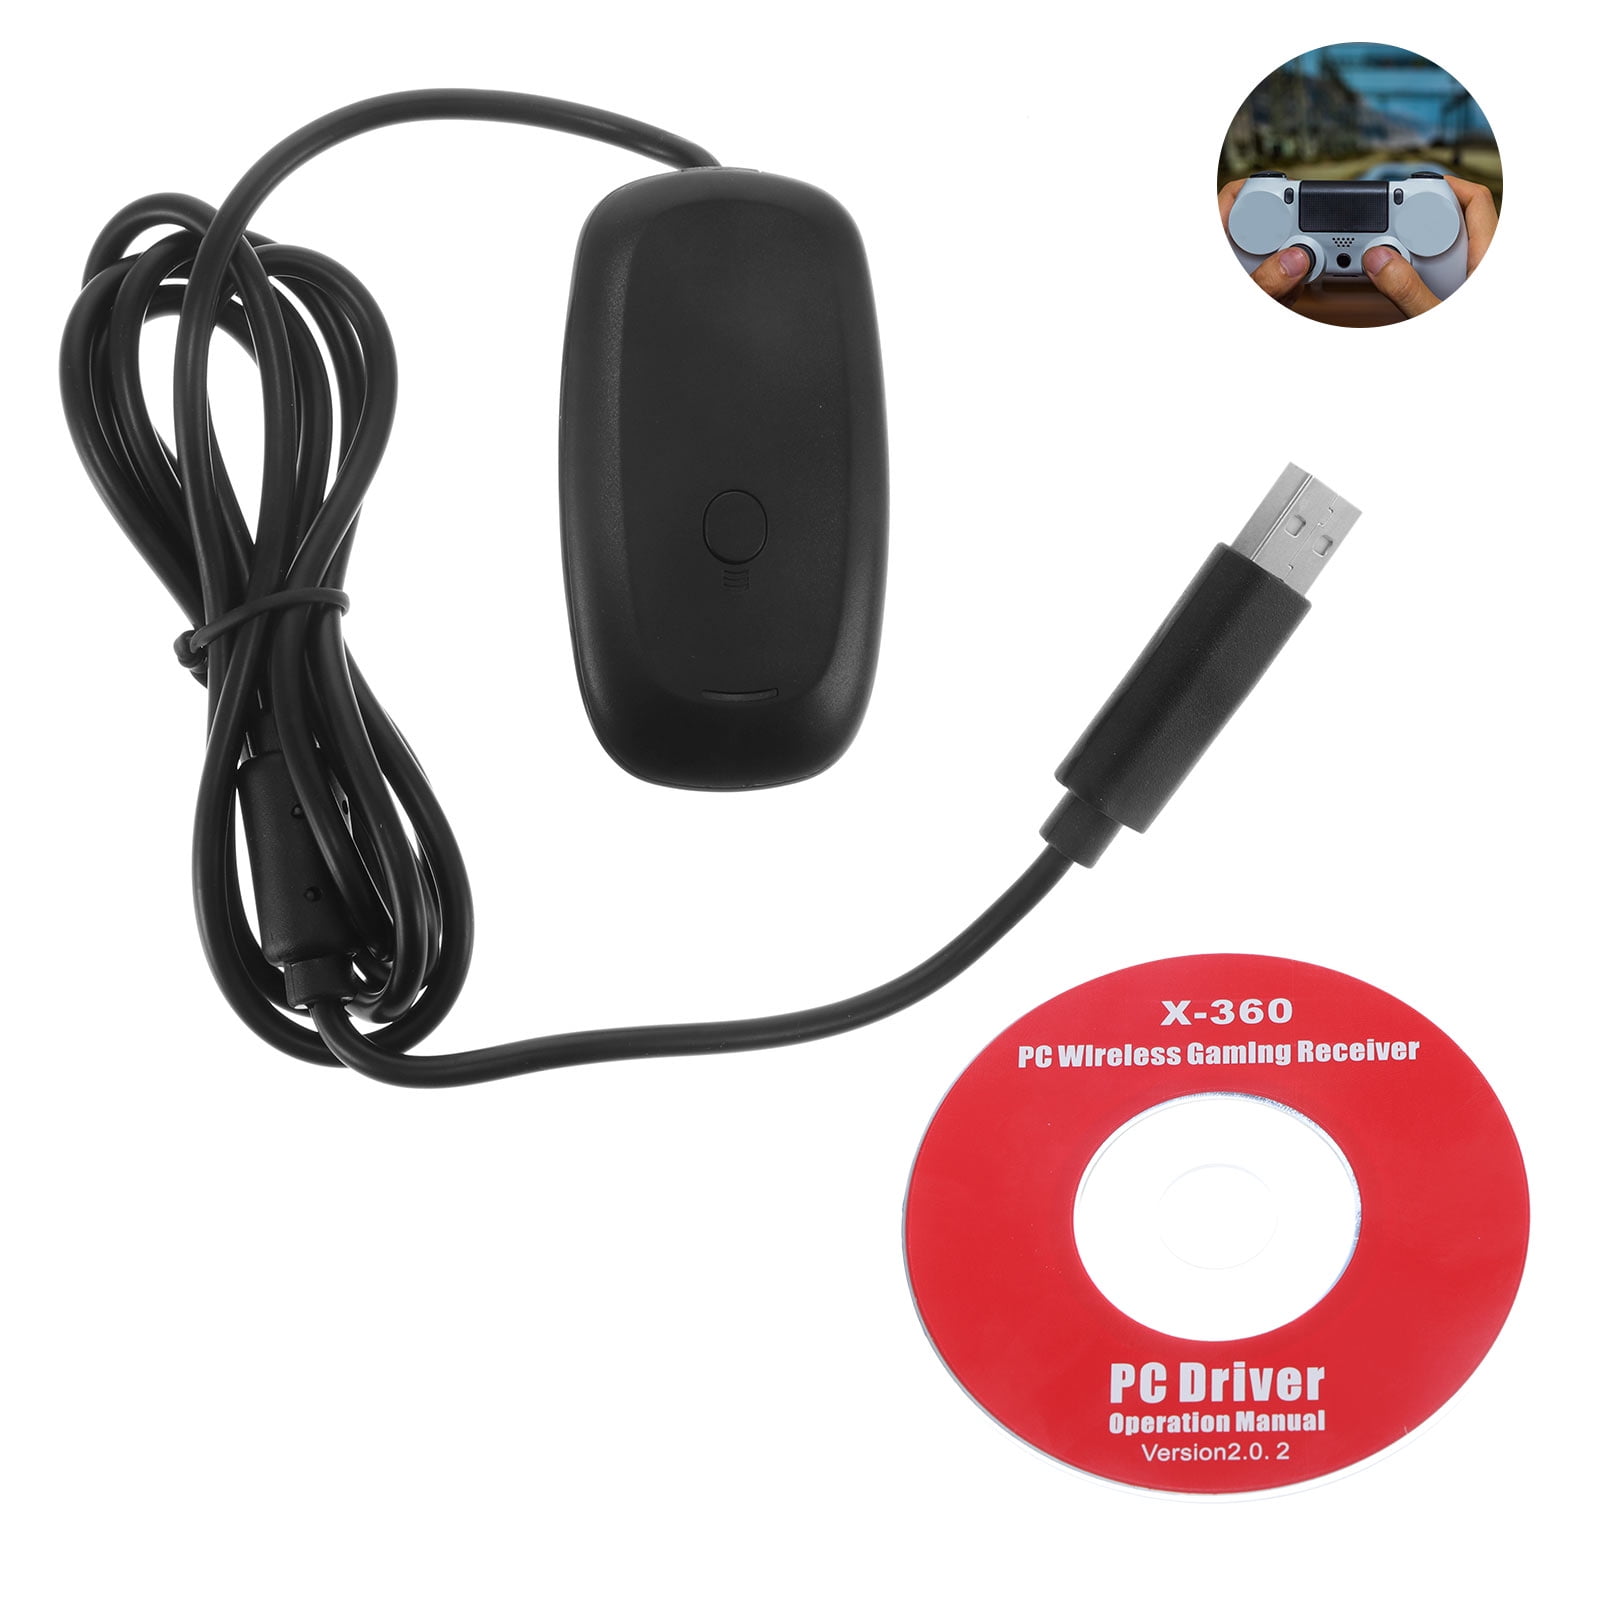 Passerby pharmacy Strengthen Wireless Controller Receiver High-speed Stable Transmission PC Adapter with  Large Connection Range PC Receiver for Game Controller - Walmart.com